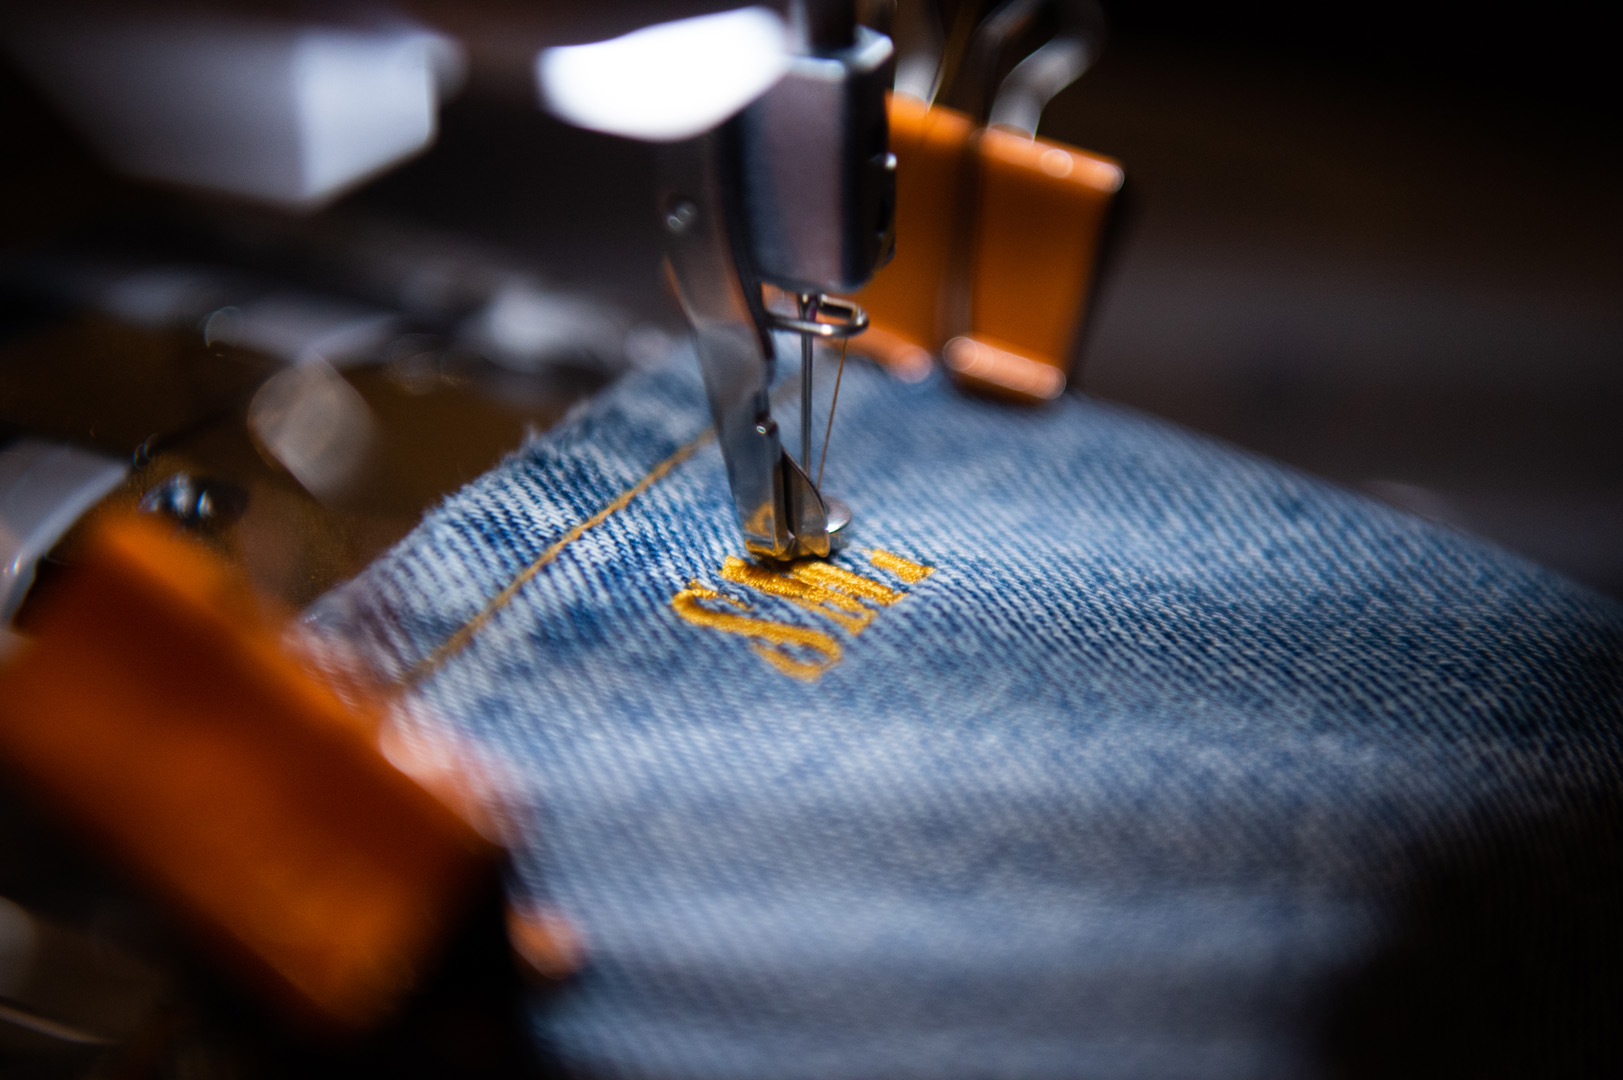 Stich embroidering a pair of jeans